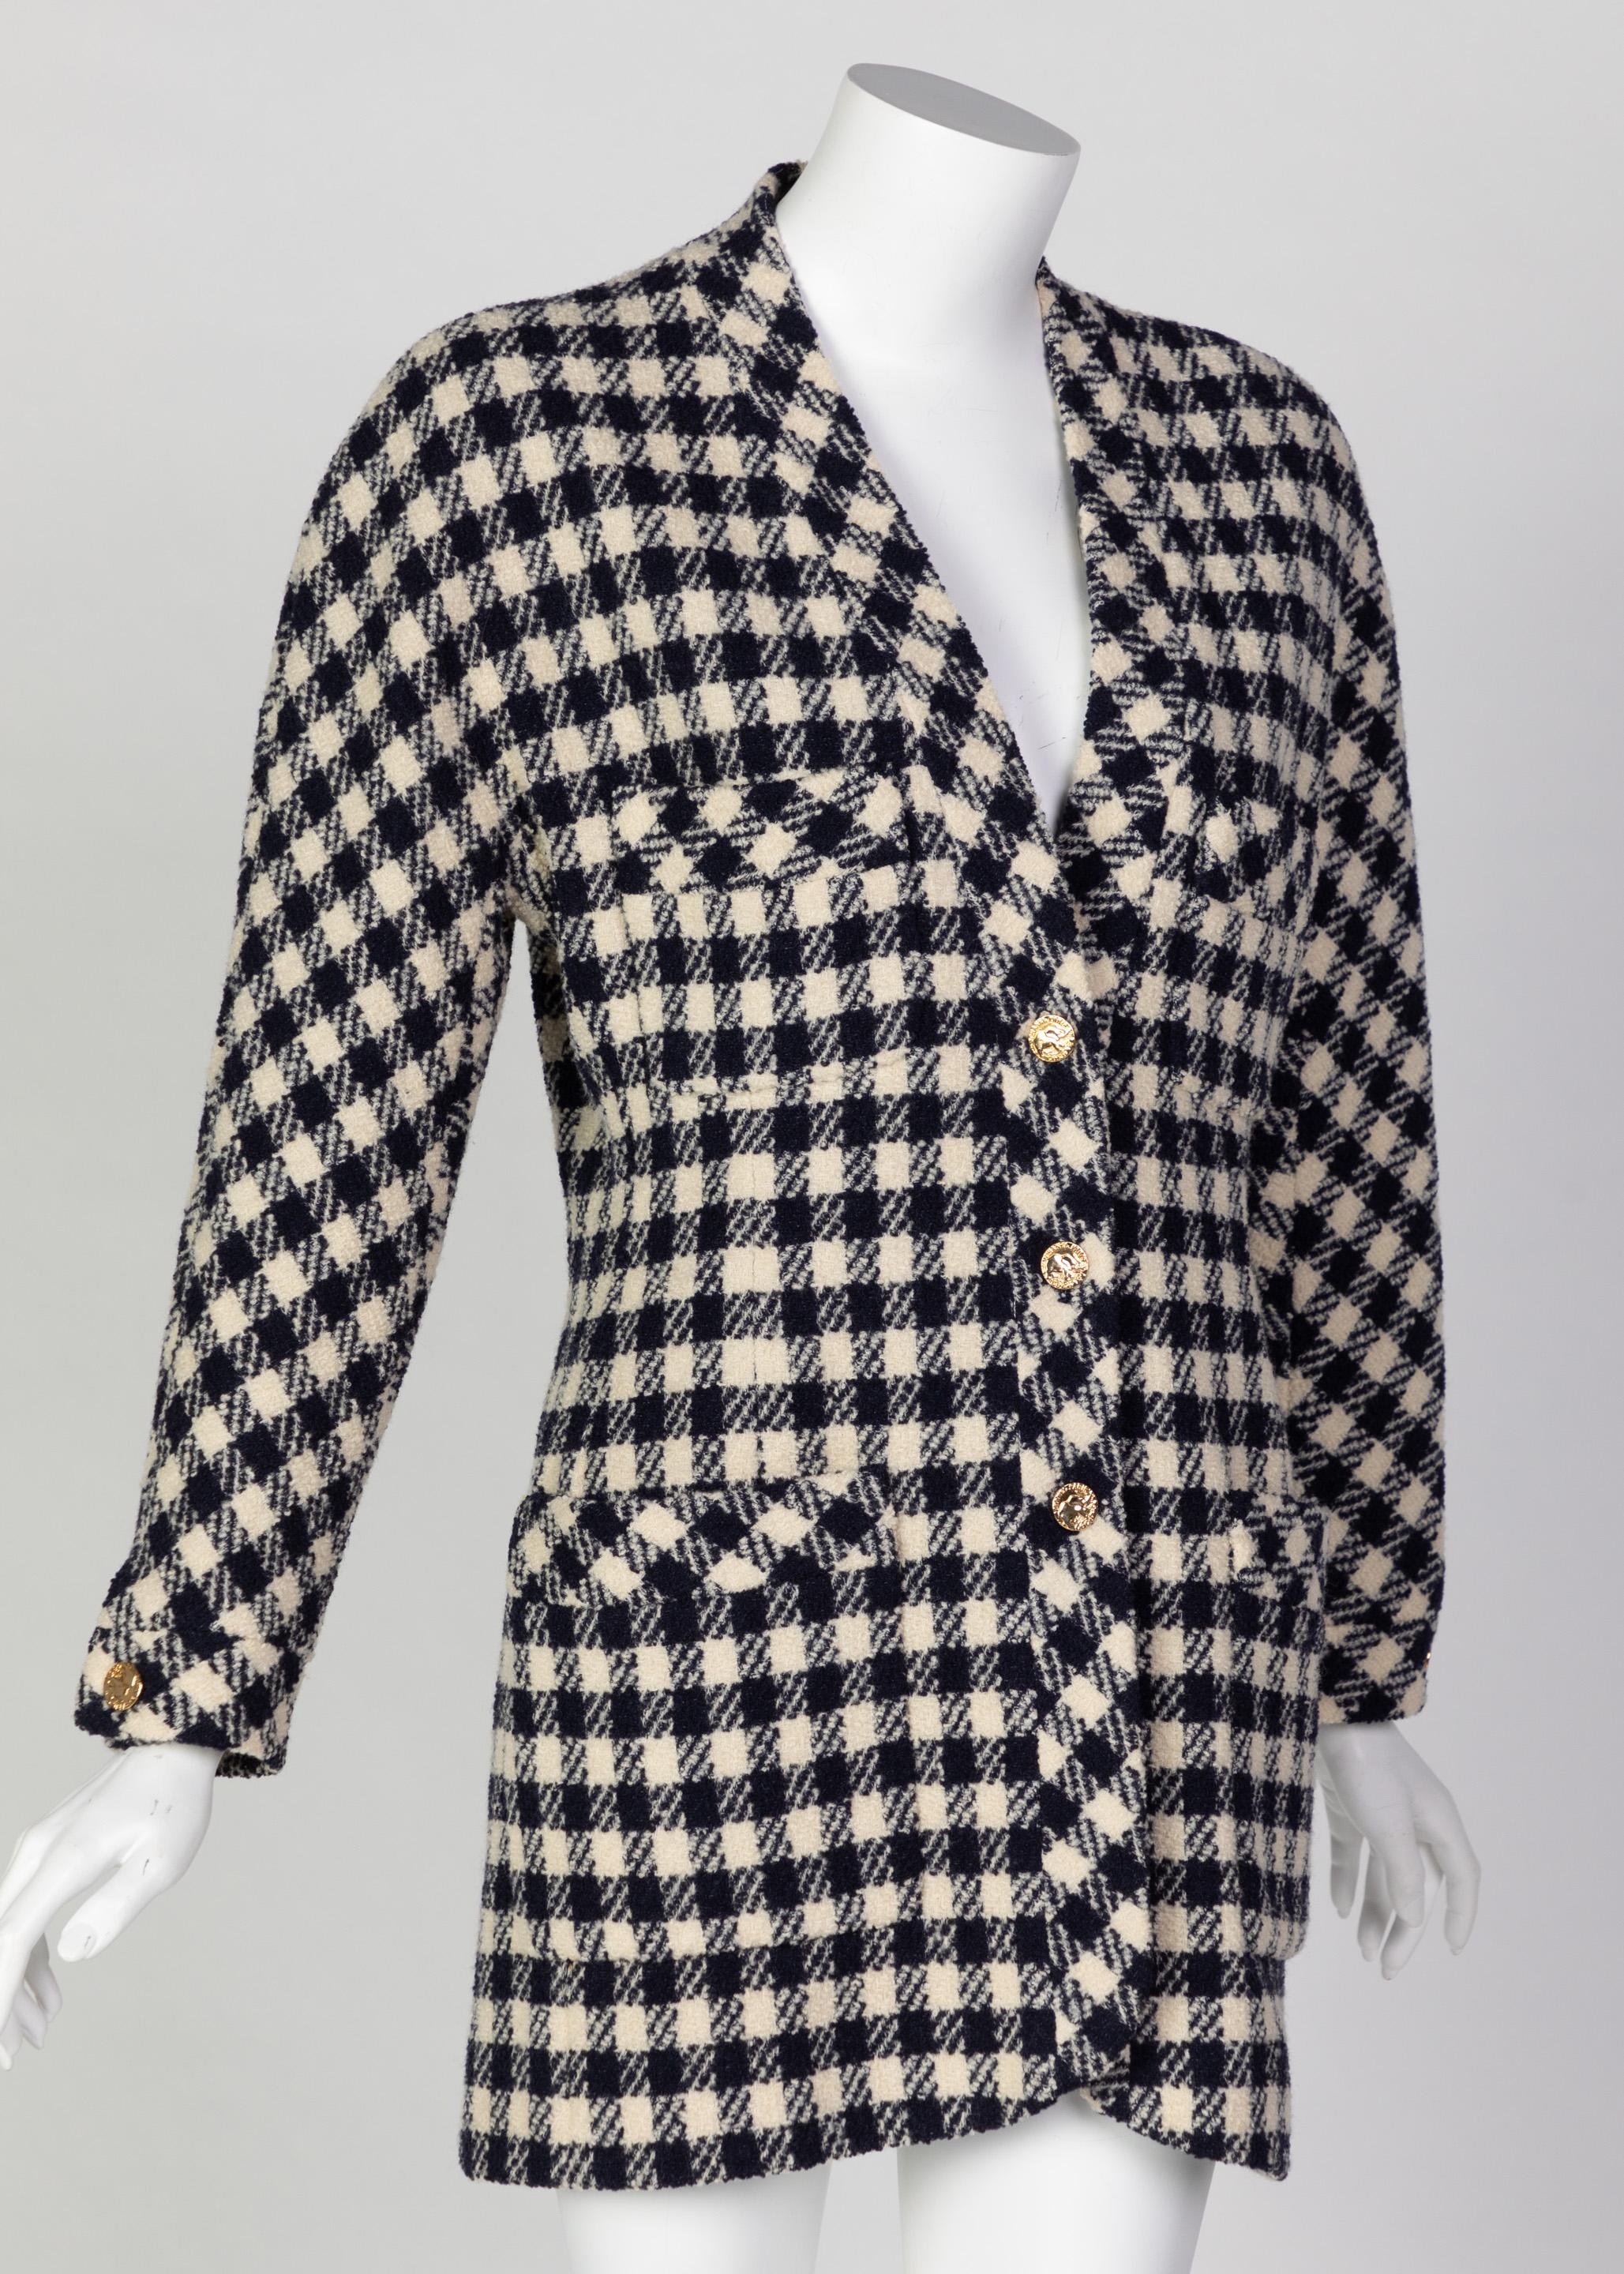 The 1980s were simultaneously a time of fun-loving glamour and a newfound appreciation for classic lines and tailoring. During this time, the House of Chanel relied on traditional patterns such as stripes and checks in neutral colors to create